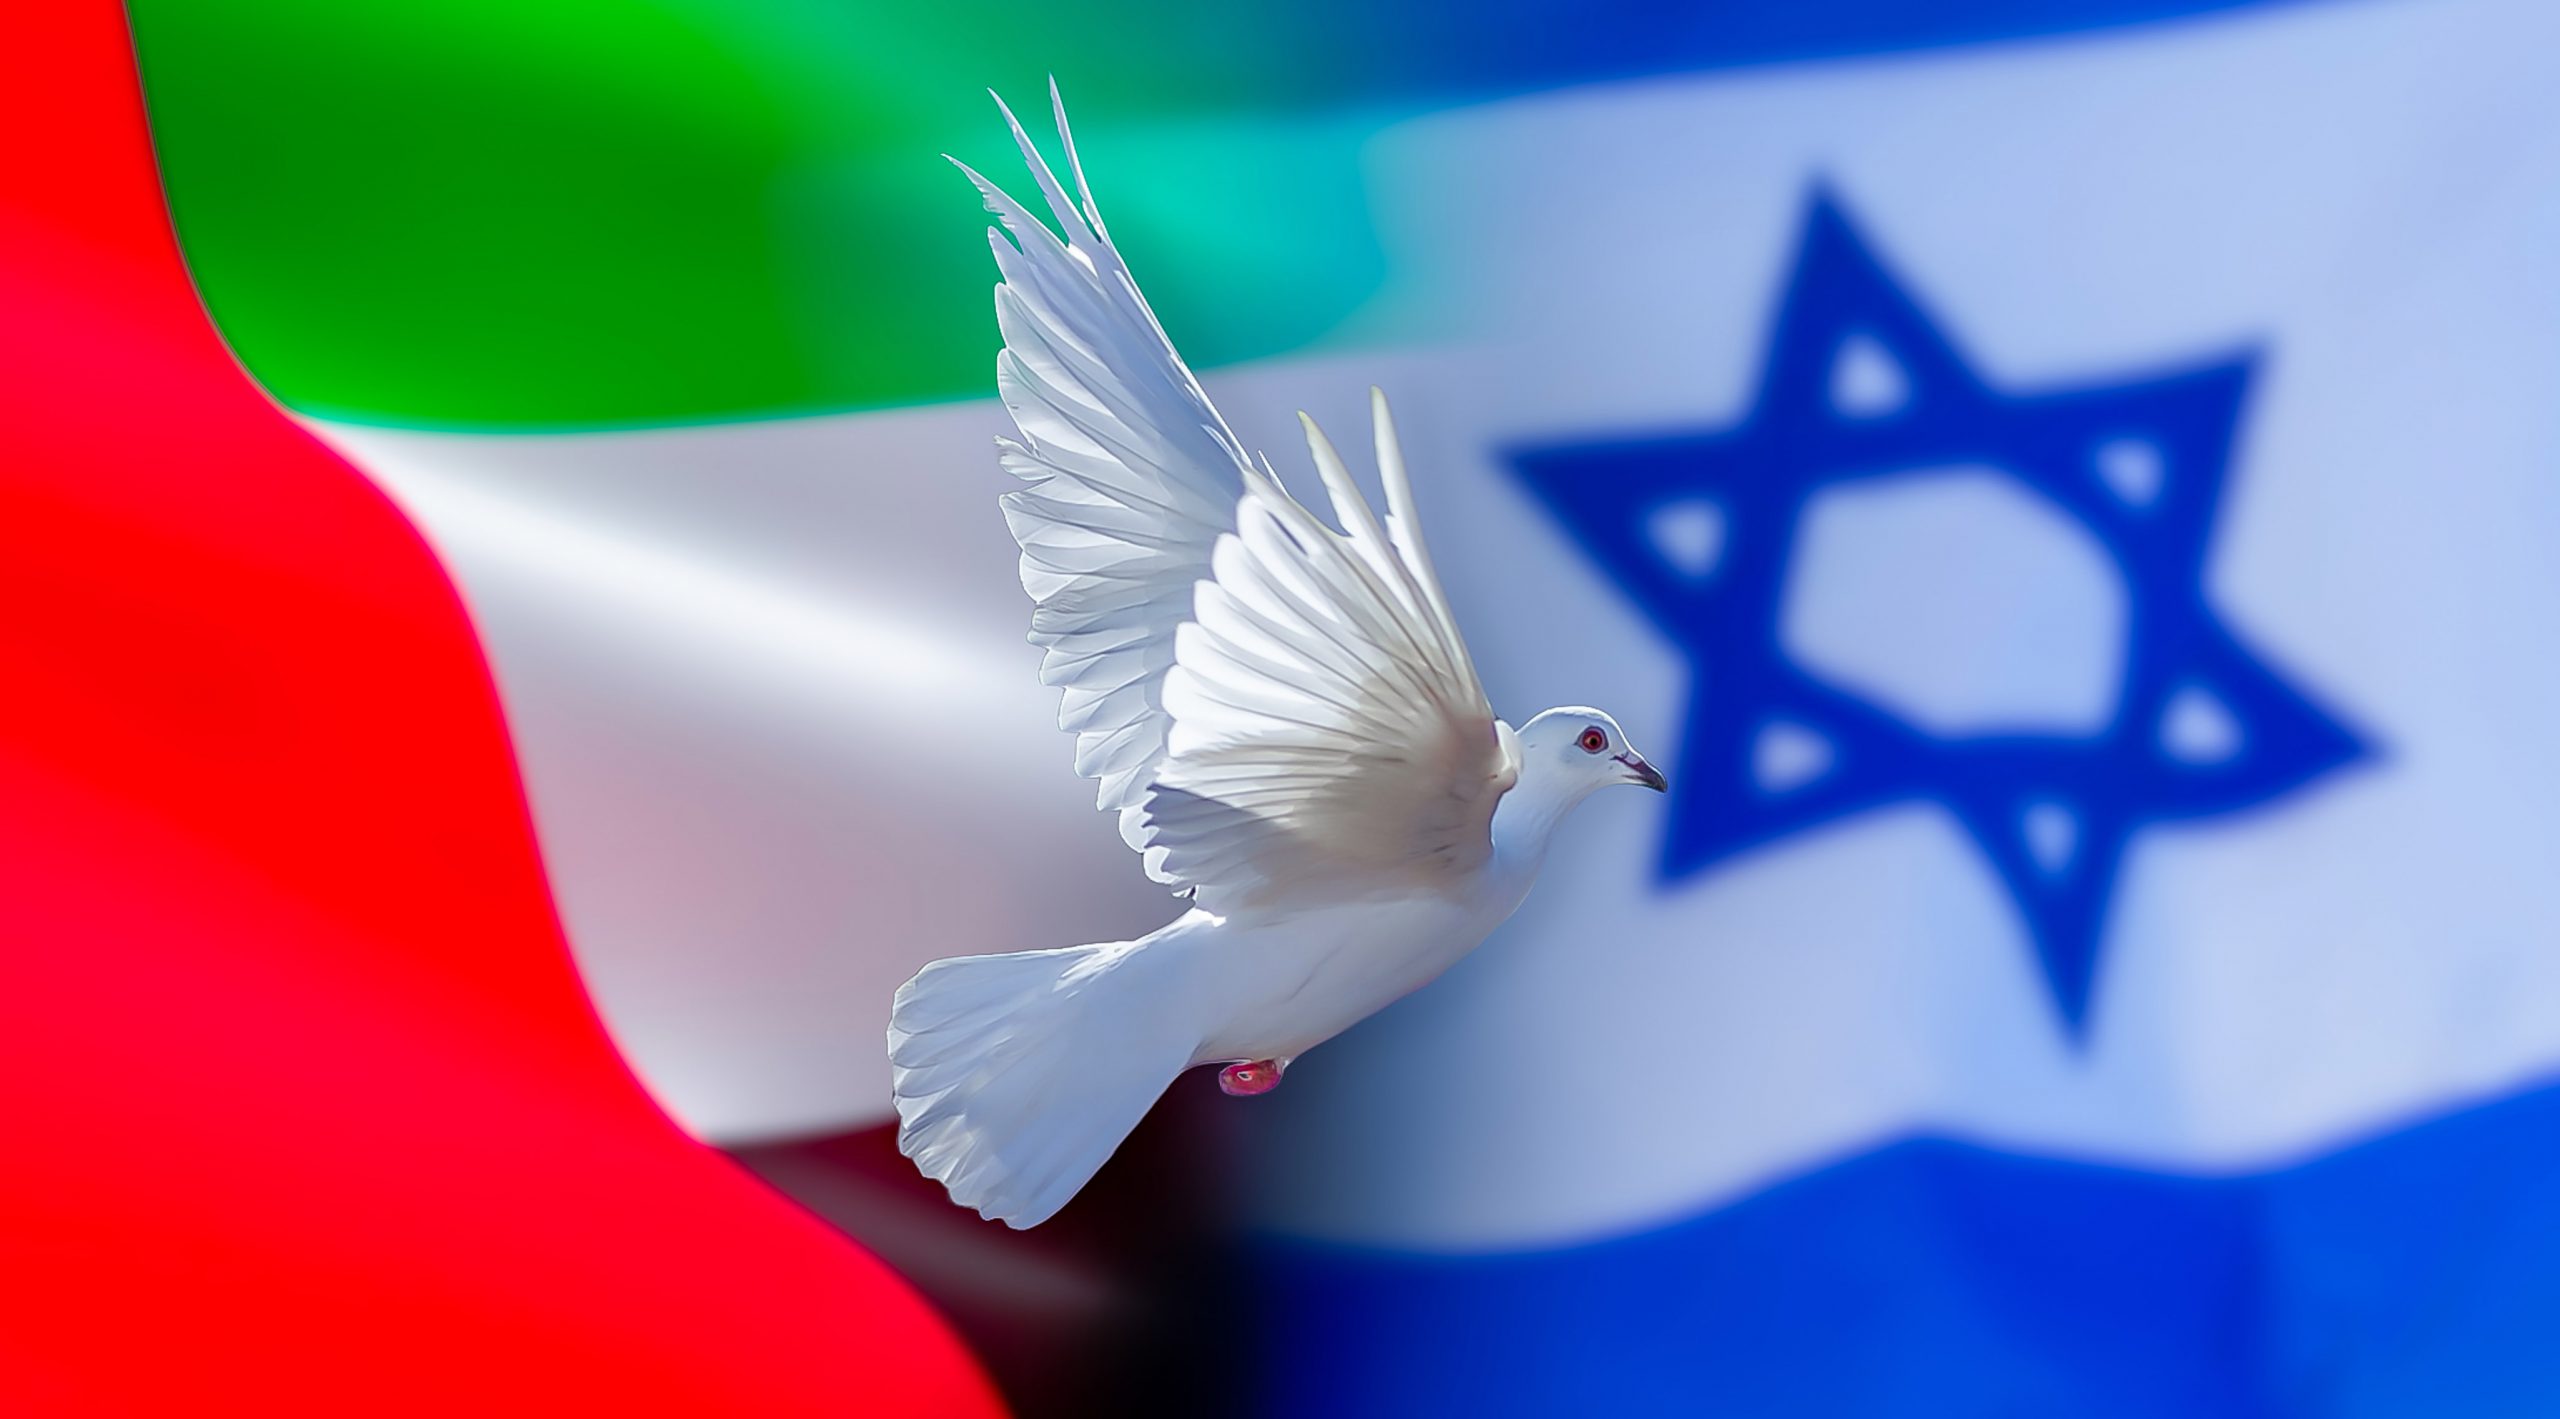 A new energy future fueled by Emirati and Israeli peace